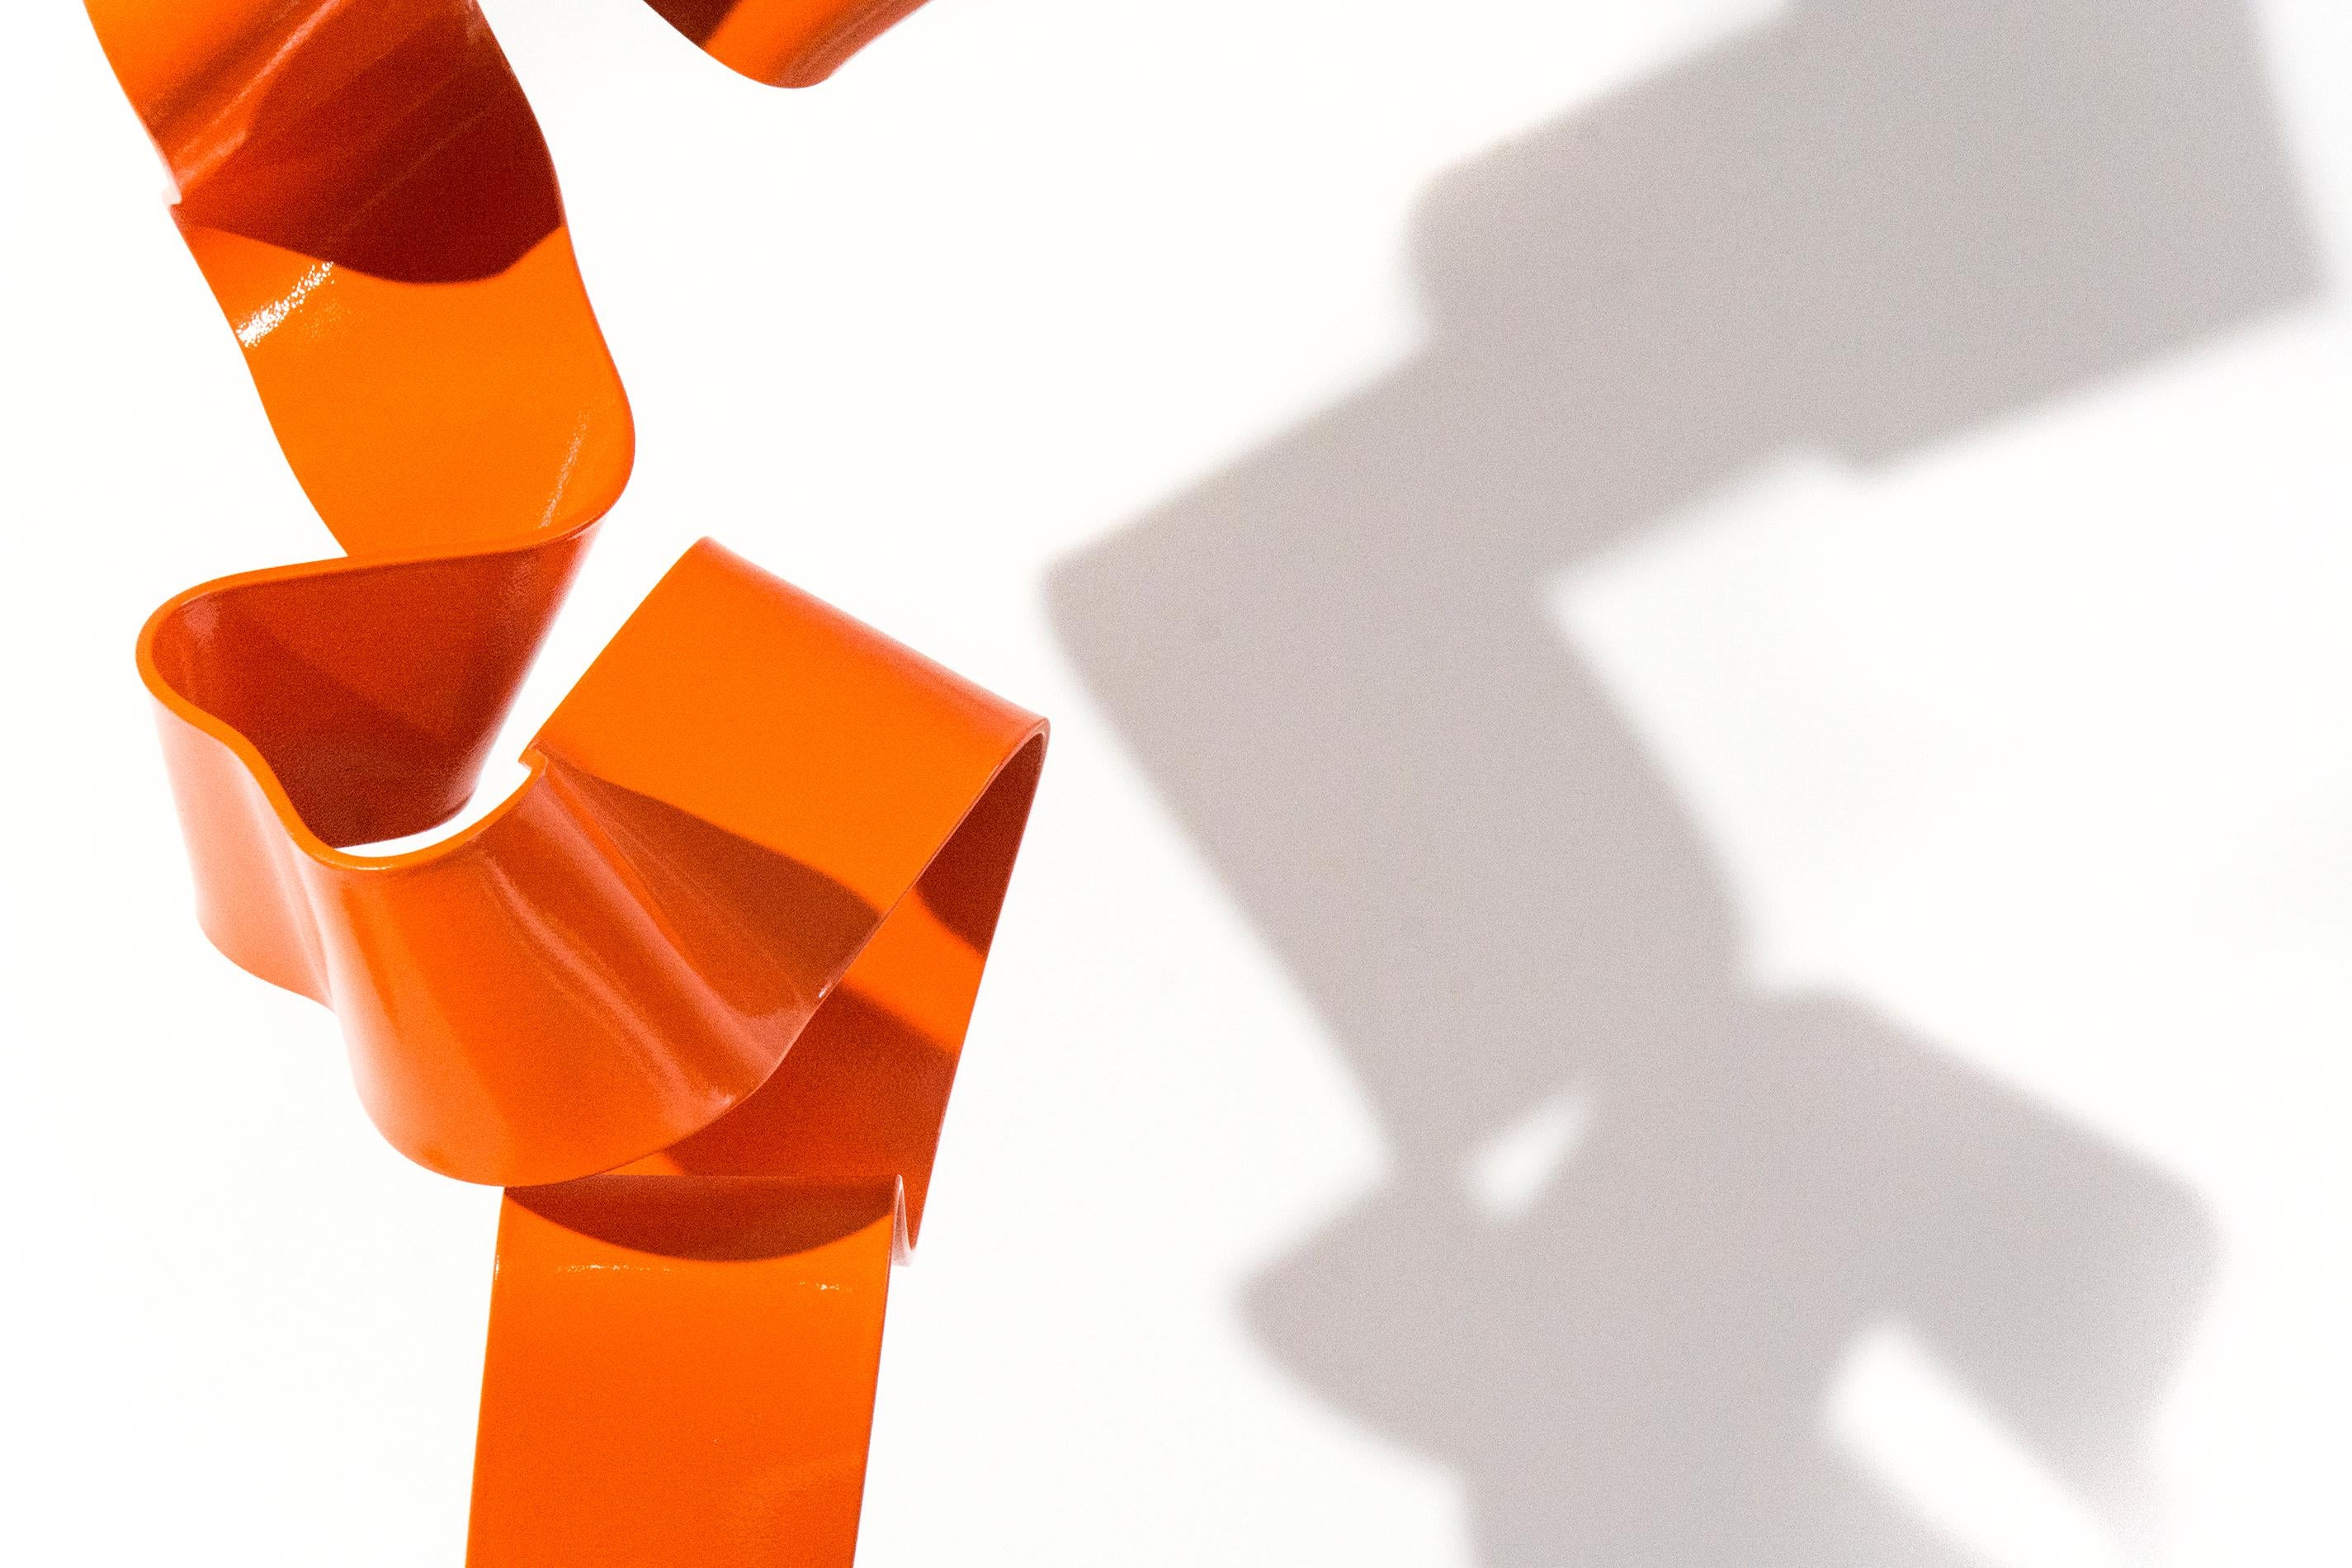 A ribbon of painted orange steel appears unwind and bounce off its base in this playful sculpture by Mark Birksted. The seeming effortlessness of this movement is belied by the physical process of making this sculpture. The artist hand bent the long